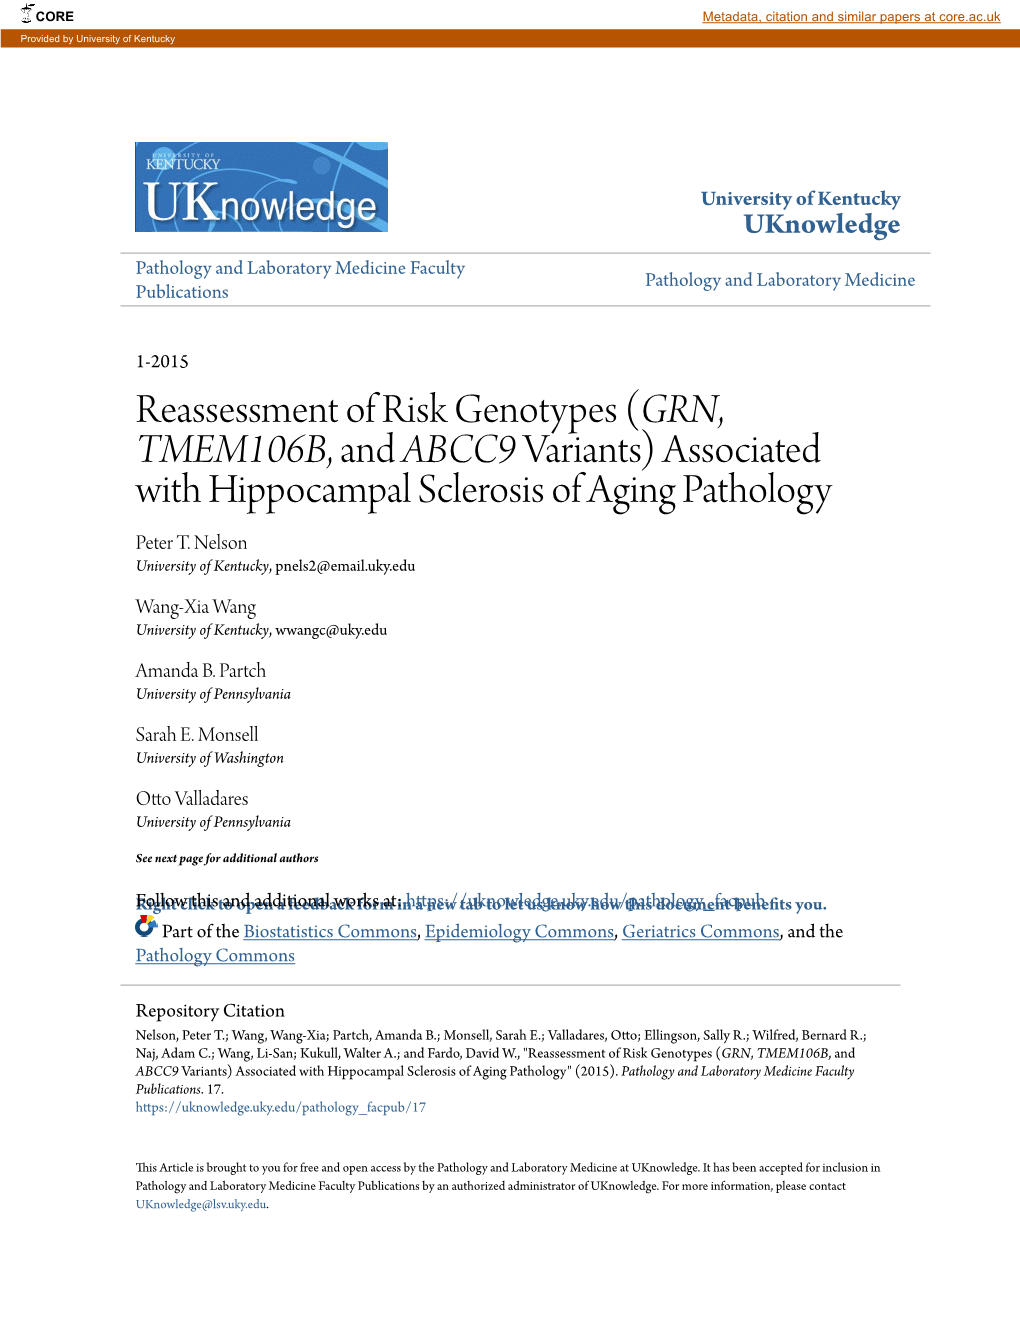 Reassessment of Risk Genotypes (GRN, TMEM106B, and ABCC9 Variants) Associated with Hippocampal Sclerosis of Aging Pathology Peter T